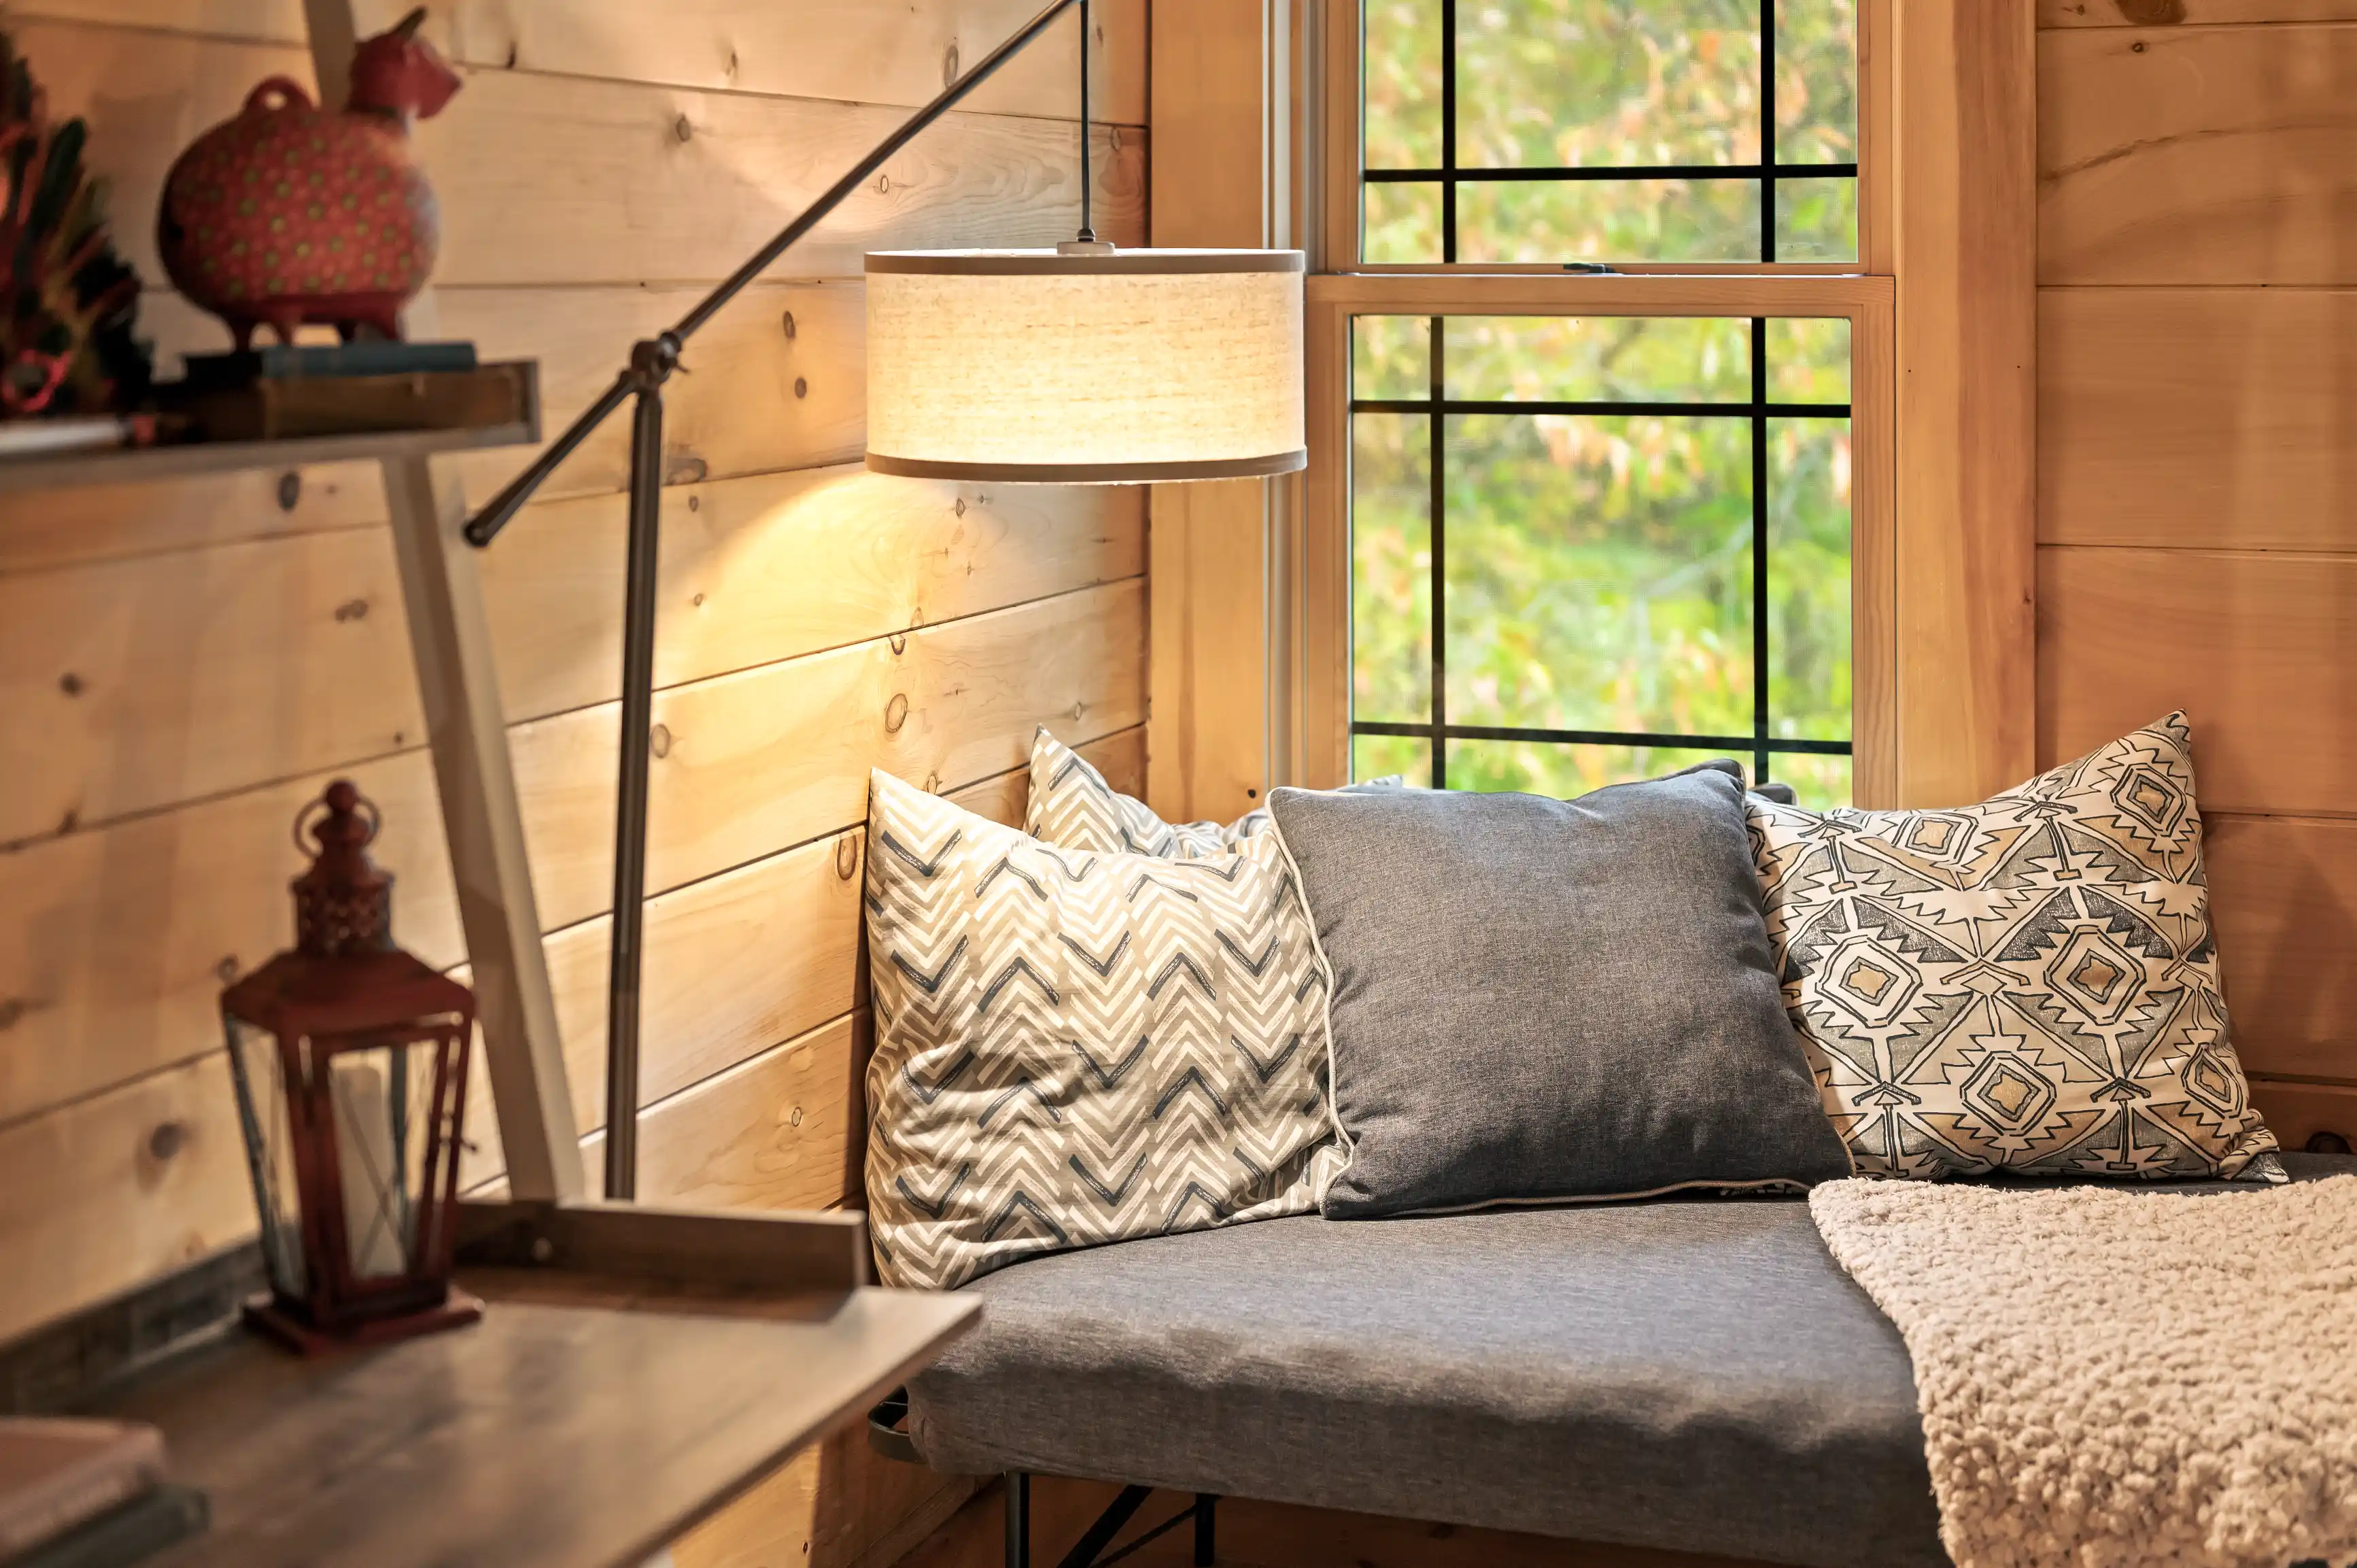 Cozy wooden cabin interior with a bench adorned with cushions, a lit floor lamp, a rustic lantern, and a window overlooking greenery.